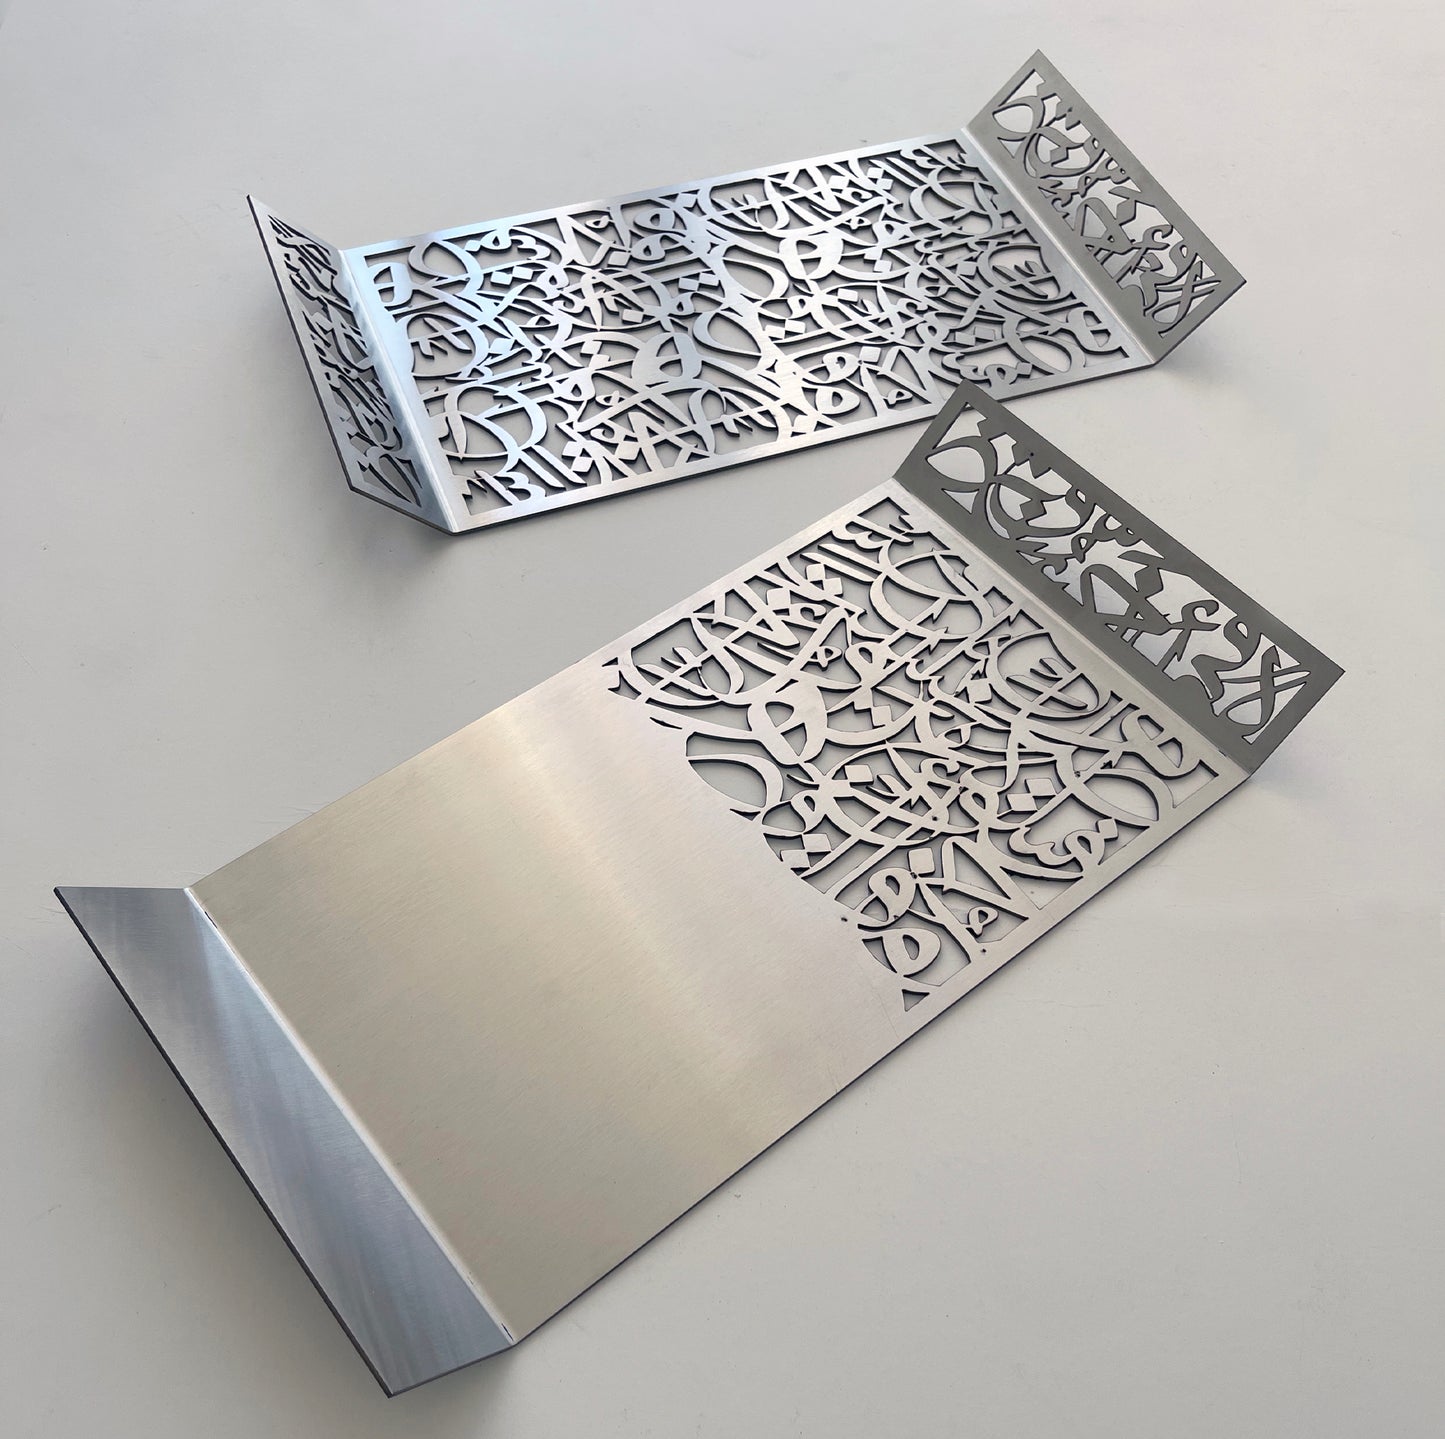 Half Caligraphy Tray / Stainless Steel